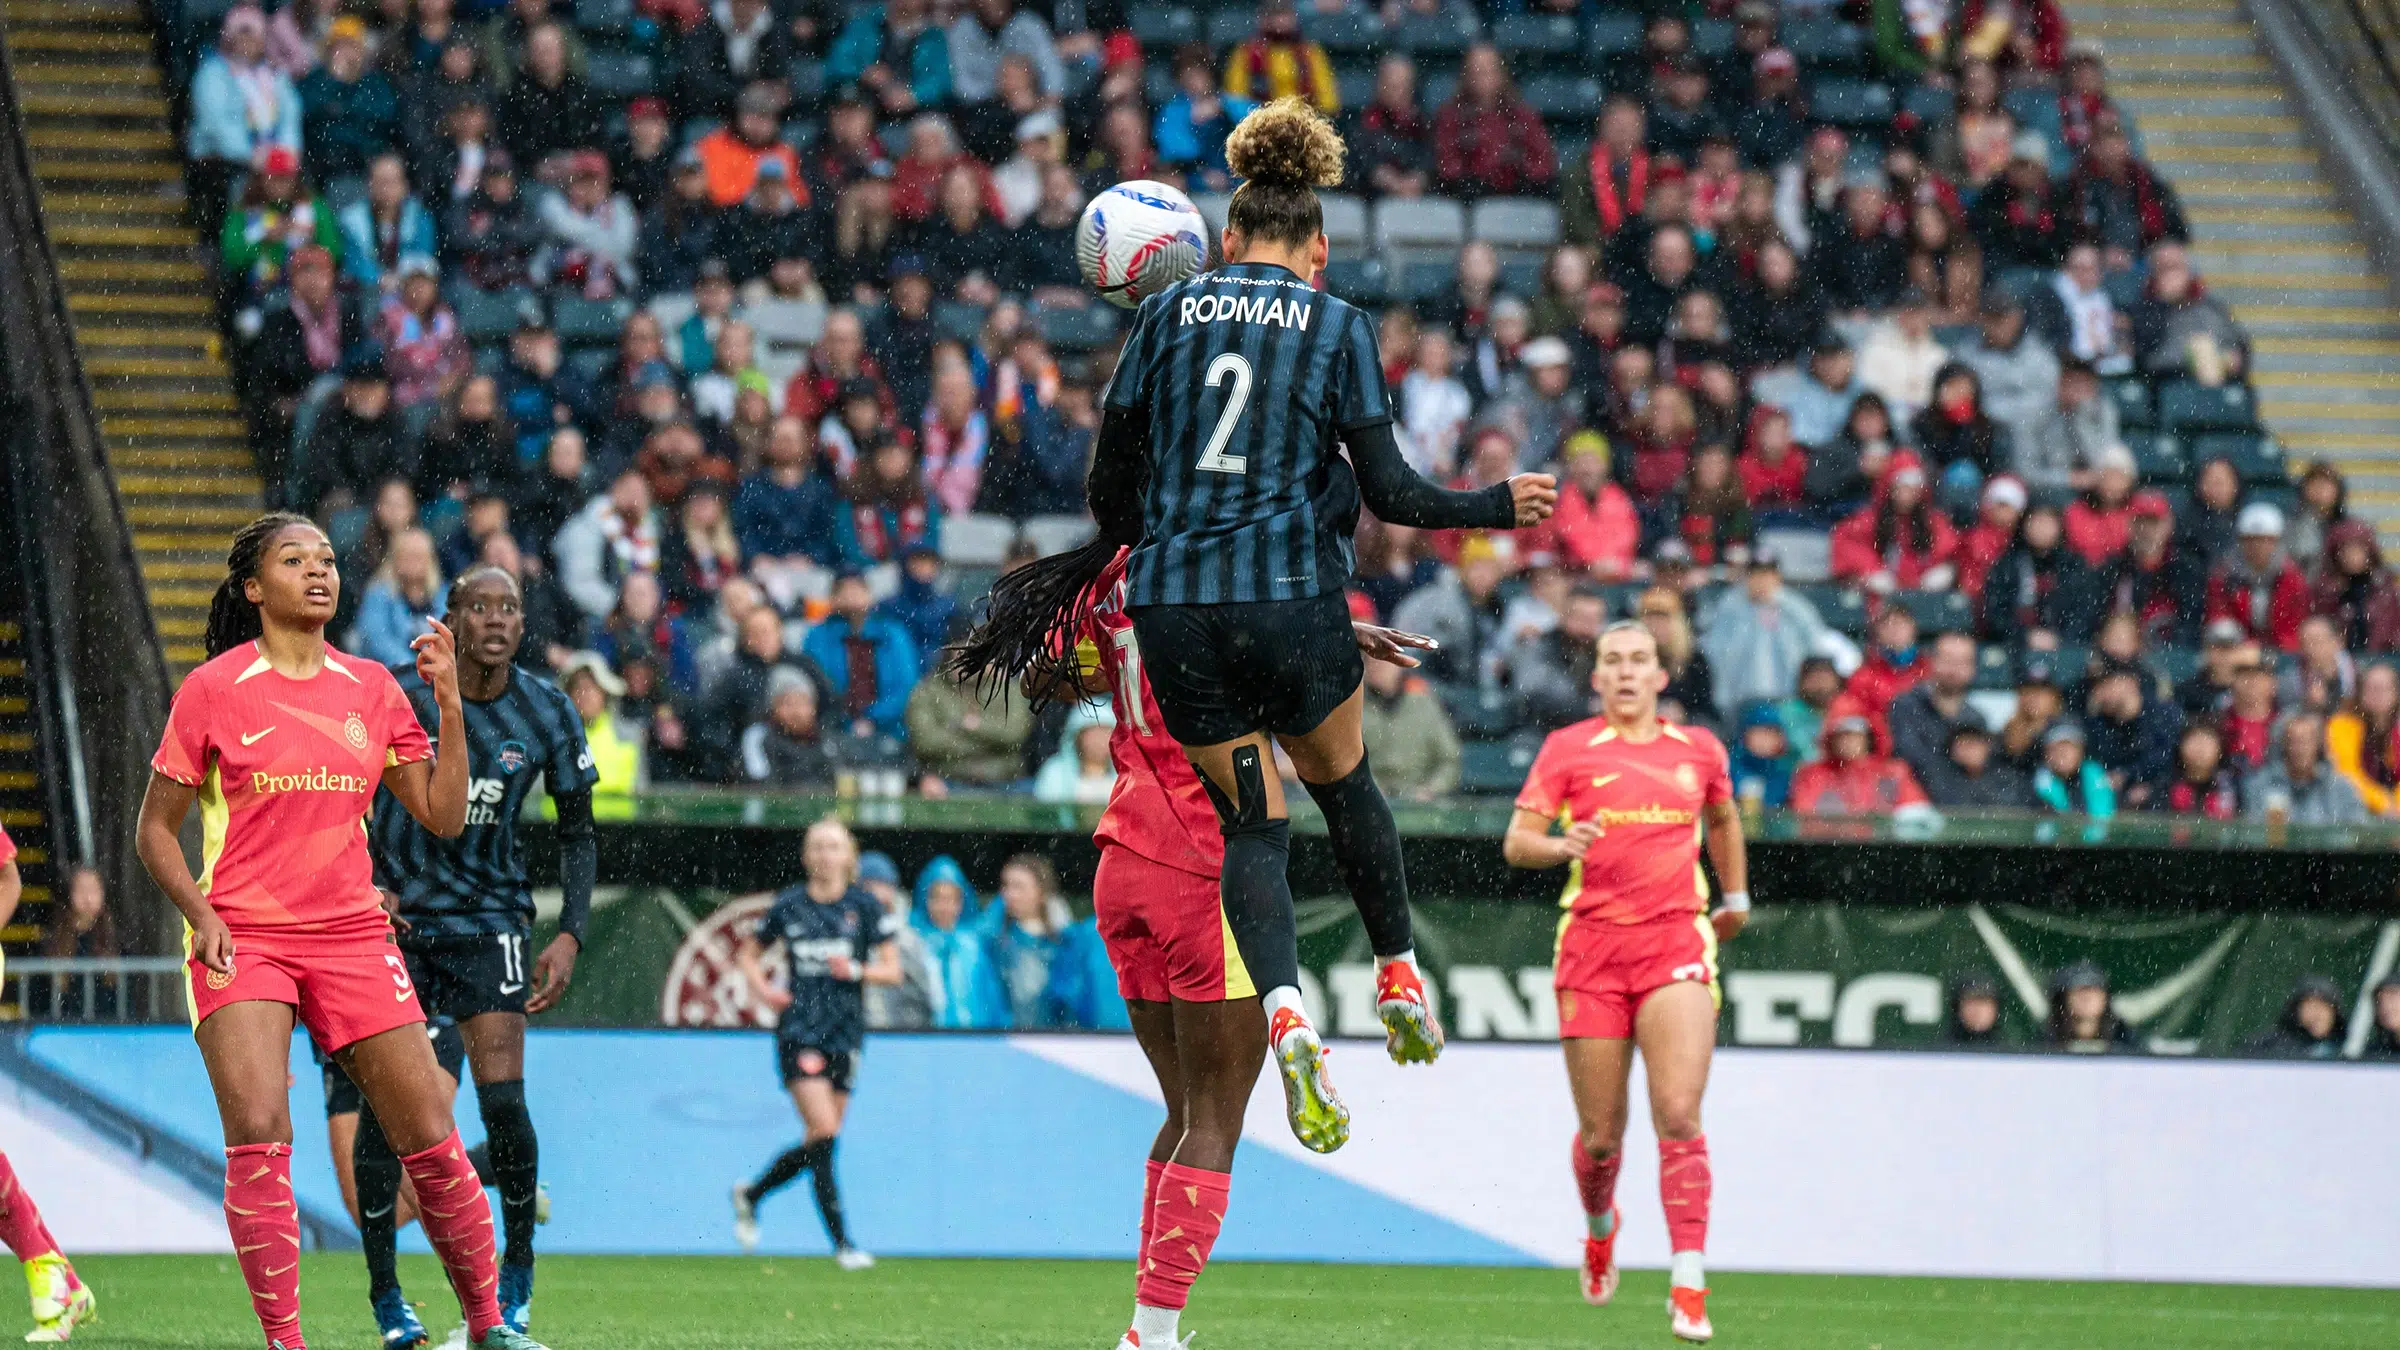 Trinity Rodman leaps in the air to head a ball over a Thorns defender.